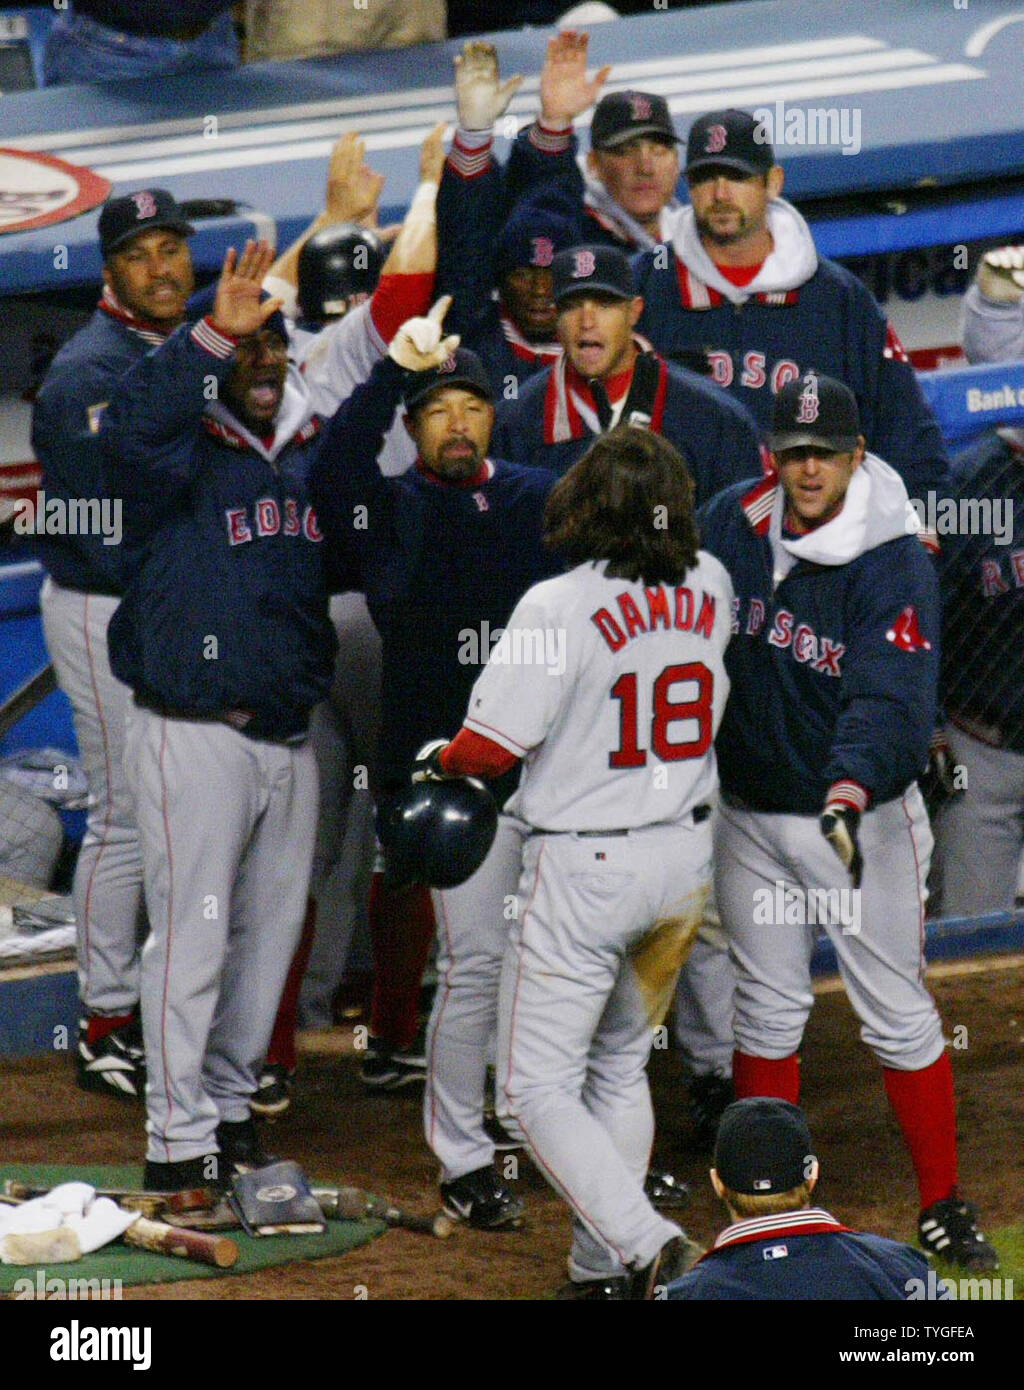 Boston Red Sox's outfielder Johnny Damon, still doing a black eye, turns up  for practice despite sitting out game two of the American League  championship series playoffs against the New York Yankees